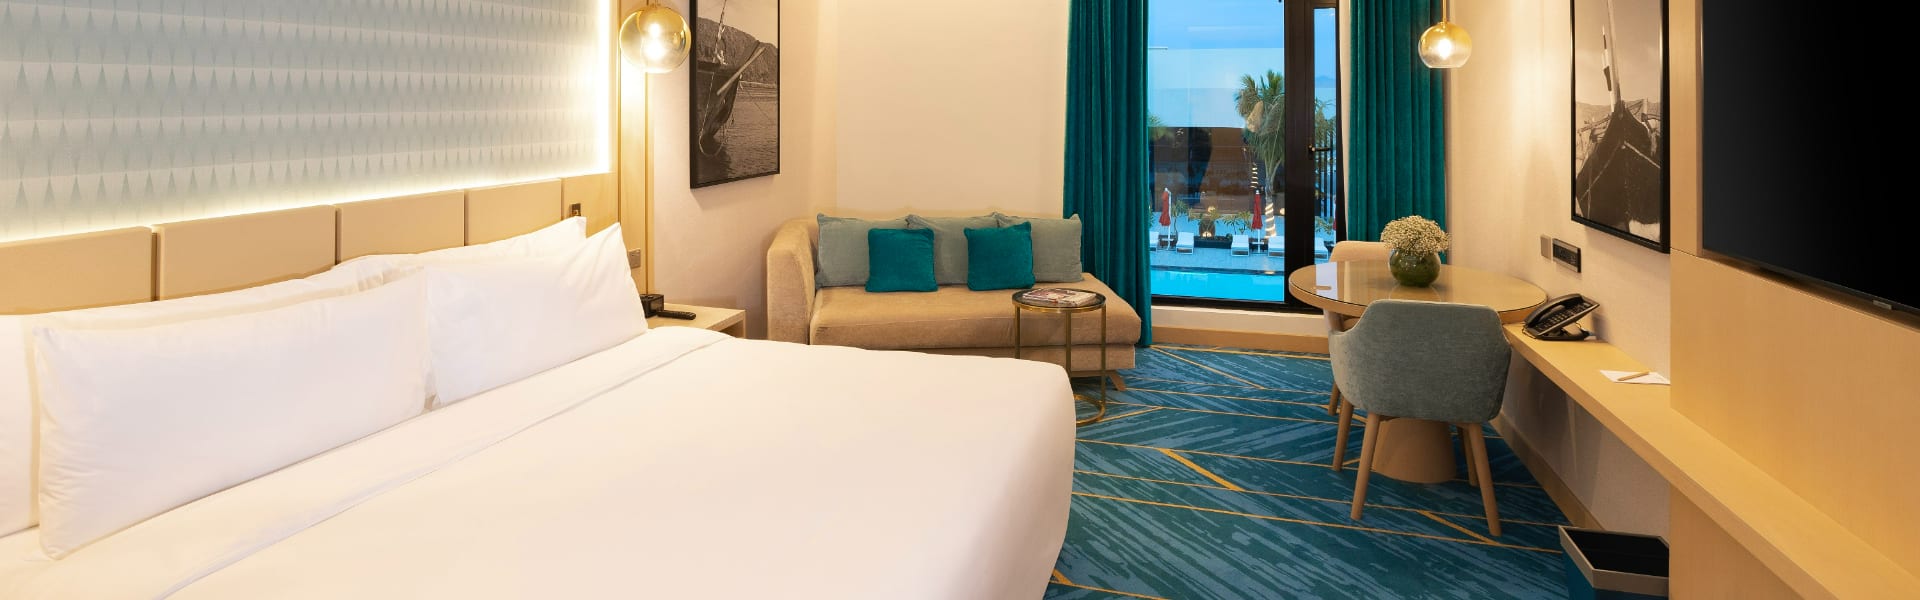 Superior Room, Family friendly hotel, sanctuary in the city with pool view at Avani Muscat Hotel &amp; Suites, Al Seeb, Muscat, Oman